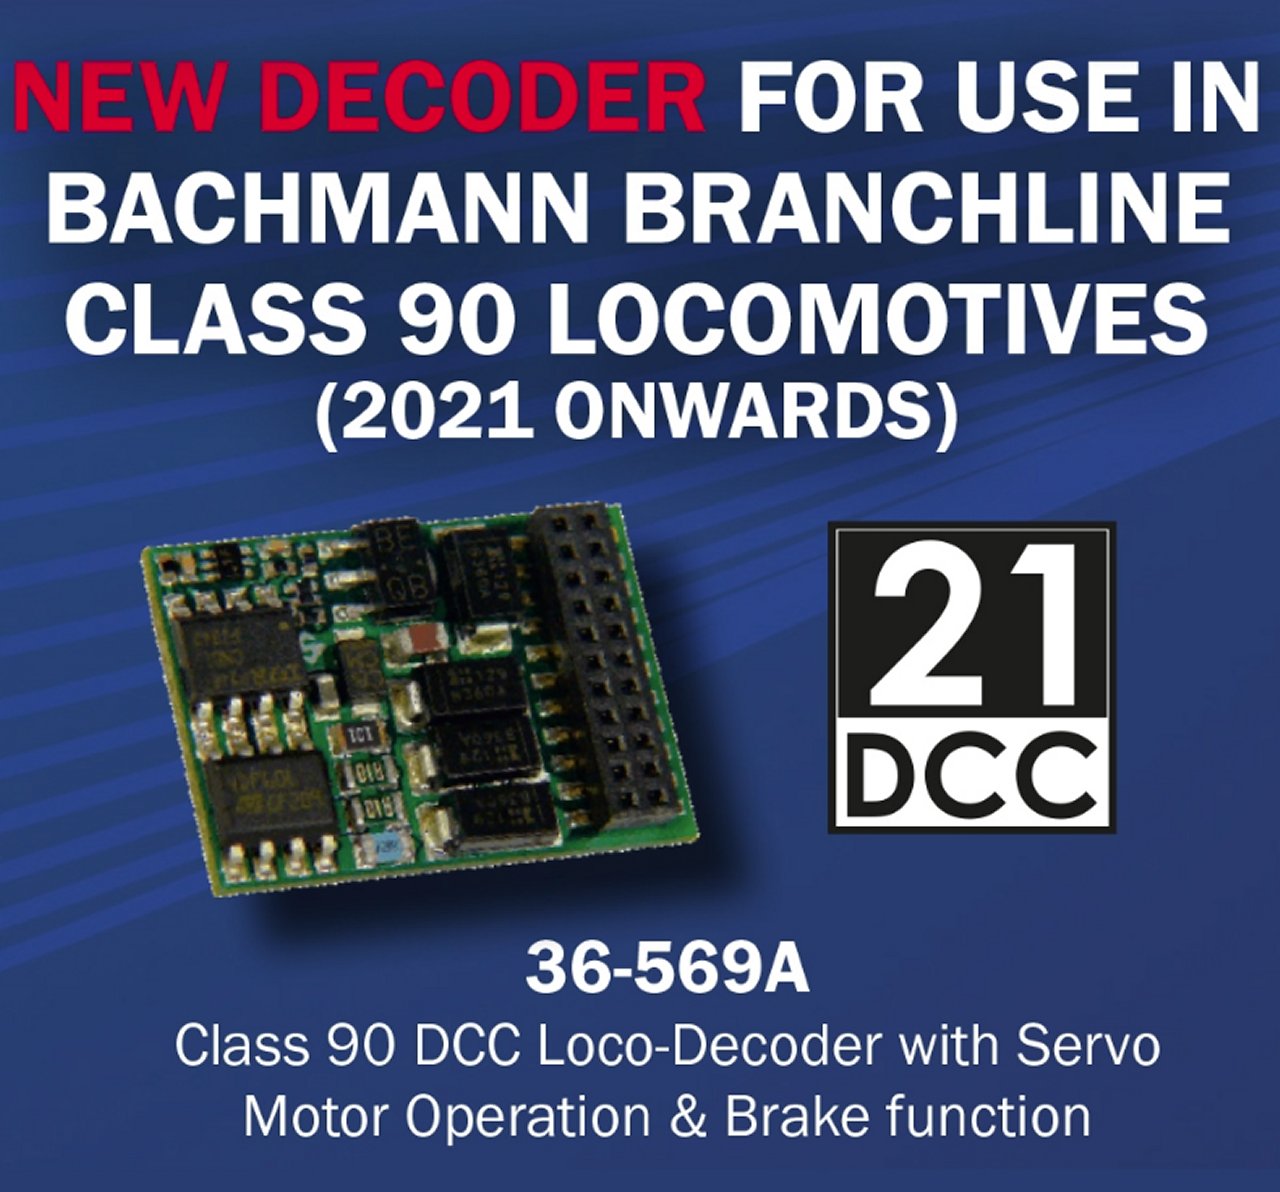 36-569A Bachmann Class 90 DCC Loco-Decoder with Servo Motor Operation & Brake function